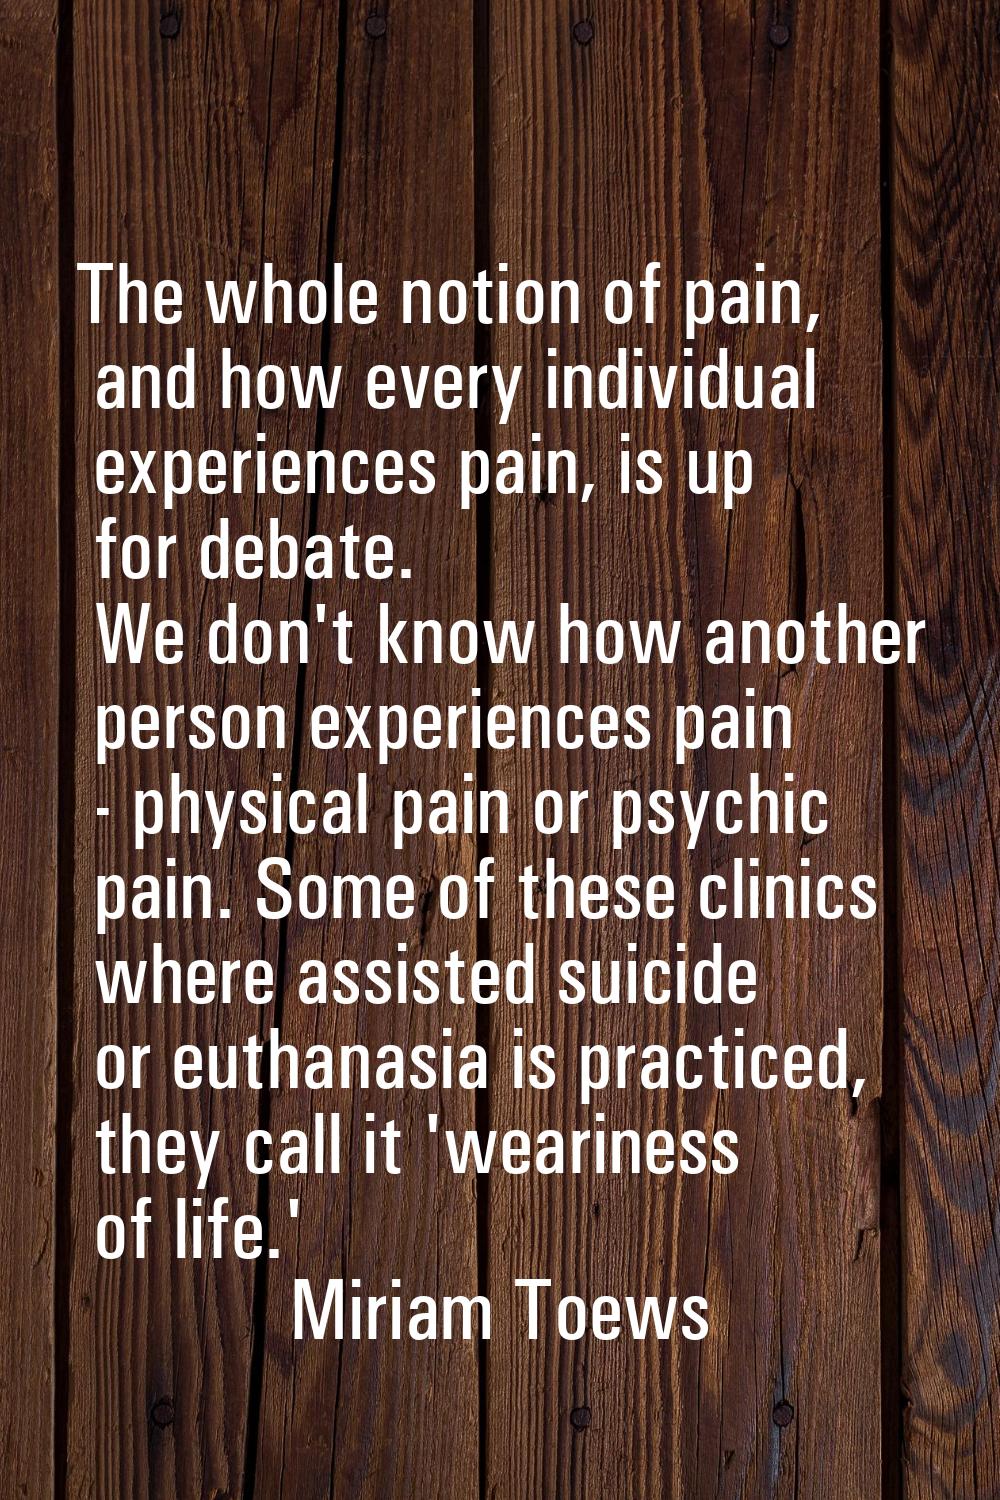 The whole notion of pain, and how every individual experiences pain, is up for debate. We don't kno